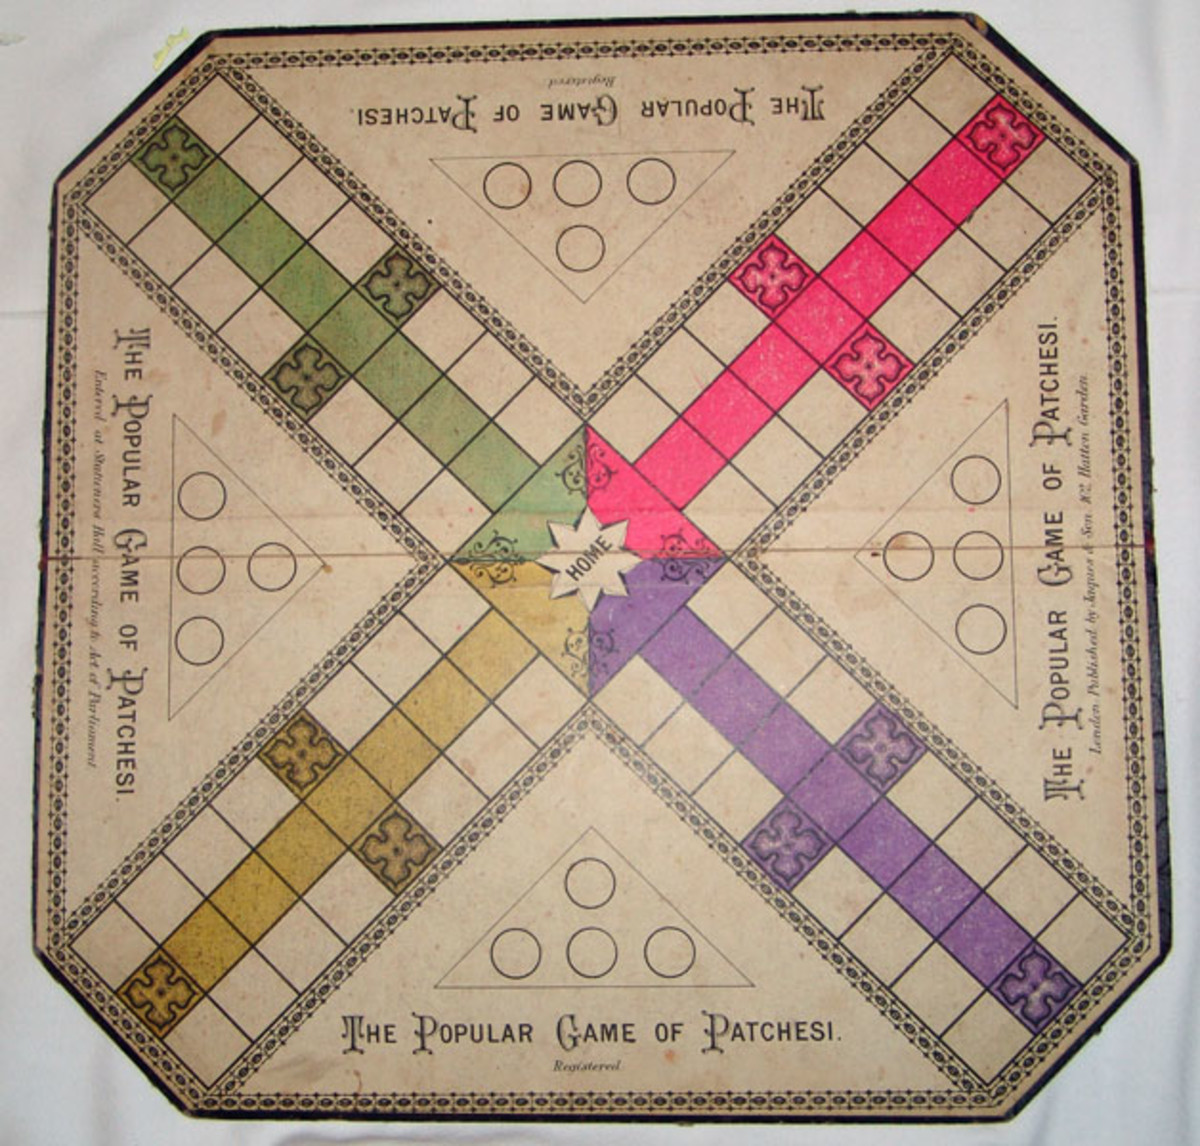 How to Play Ludo (Or, Parcheesi): An Easy-To-Follow Guide